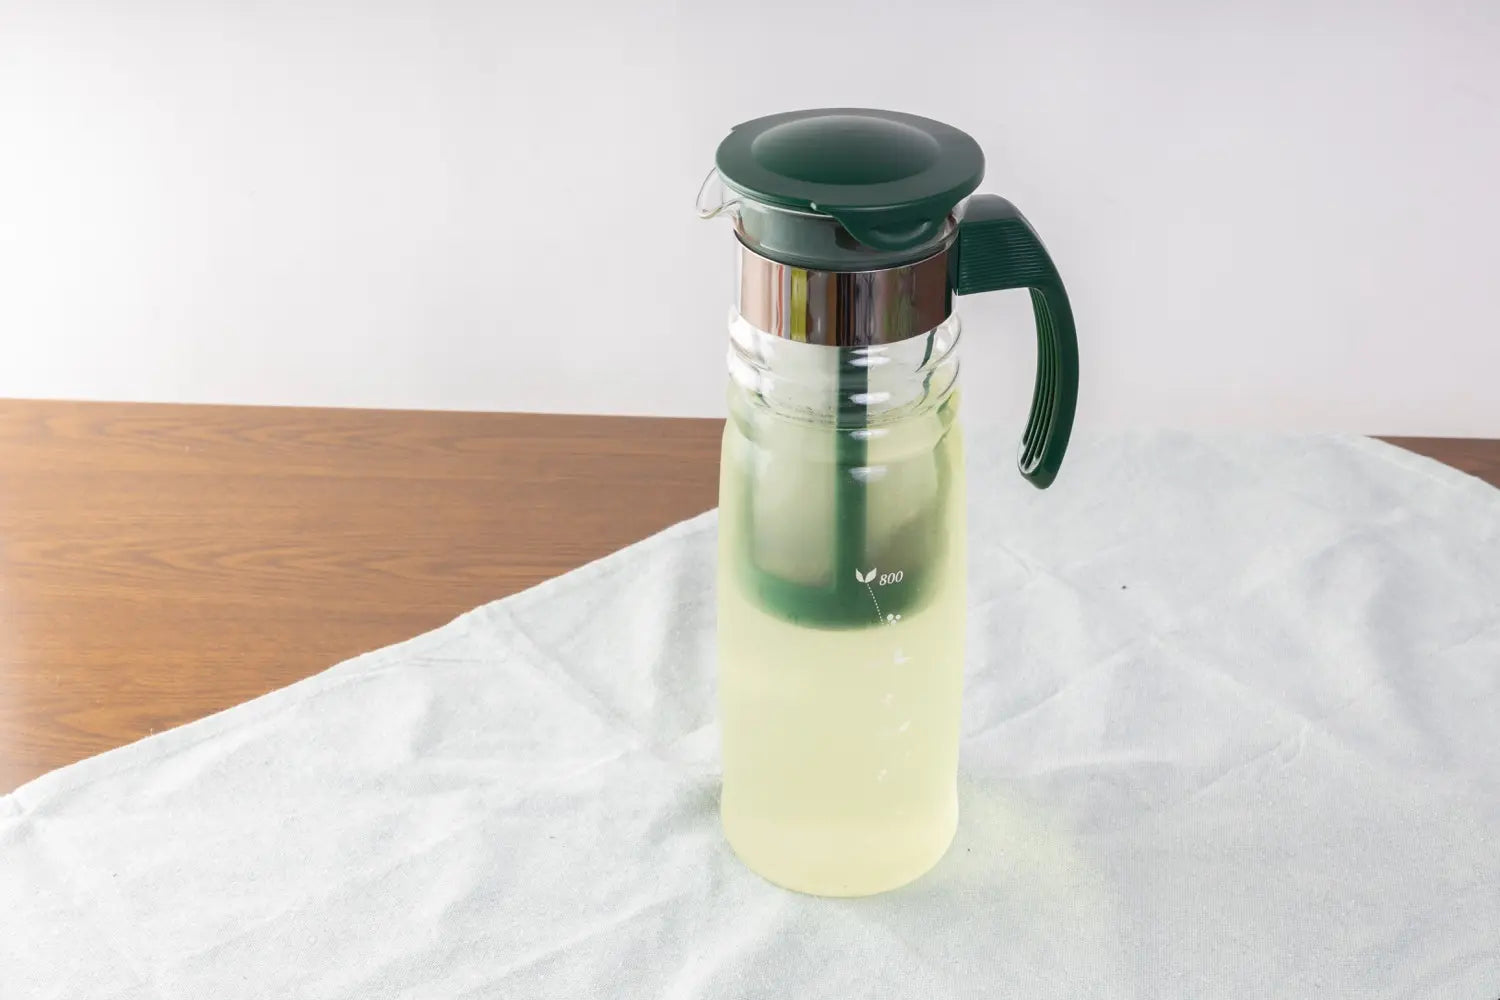 The Hario Iced Tea Brewer filled with cold brew green tea